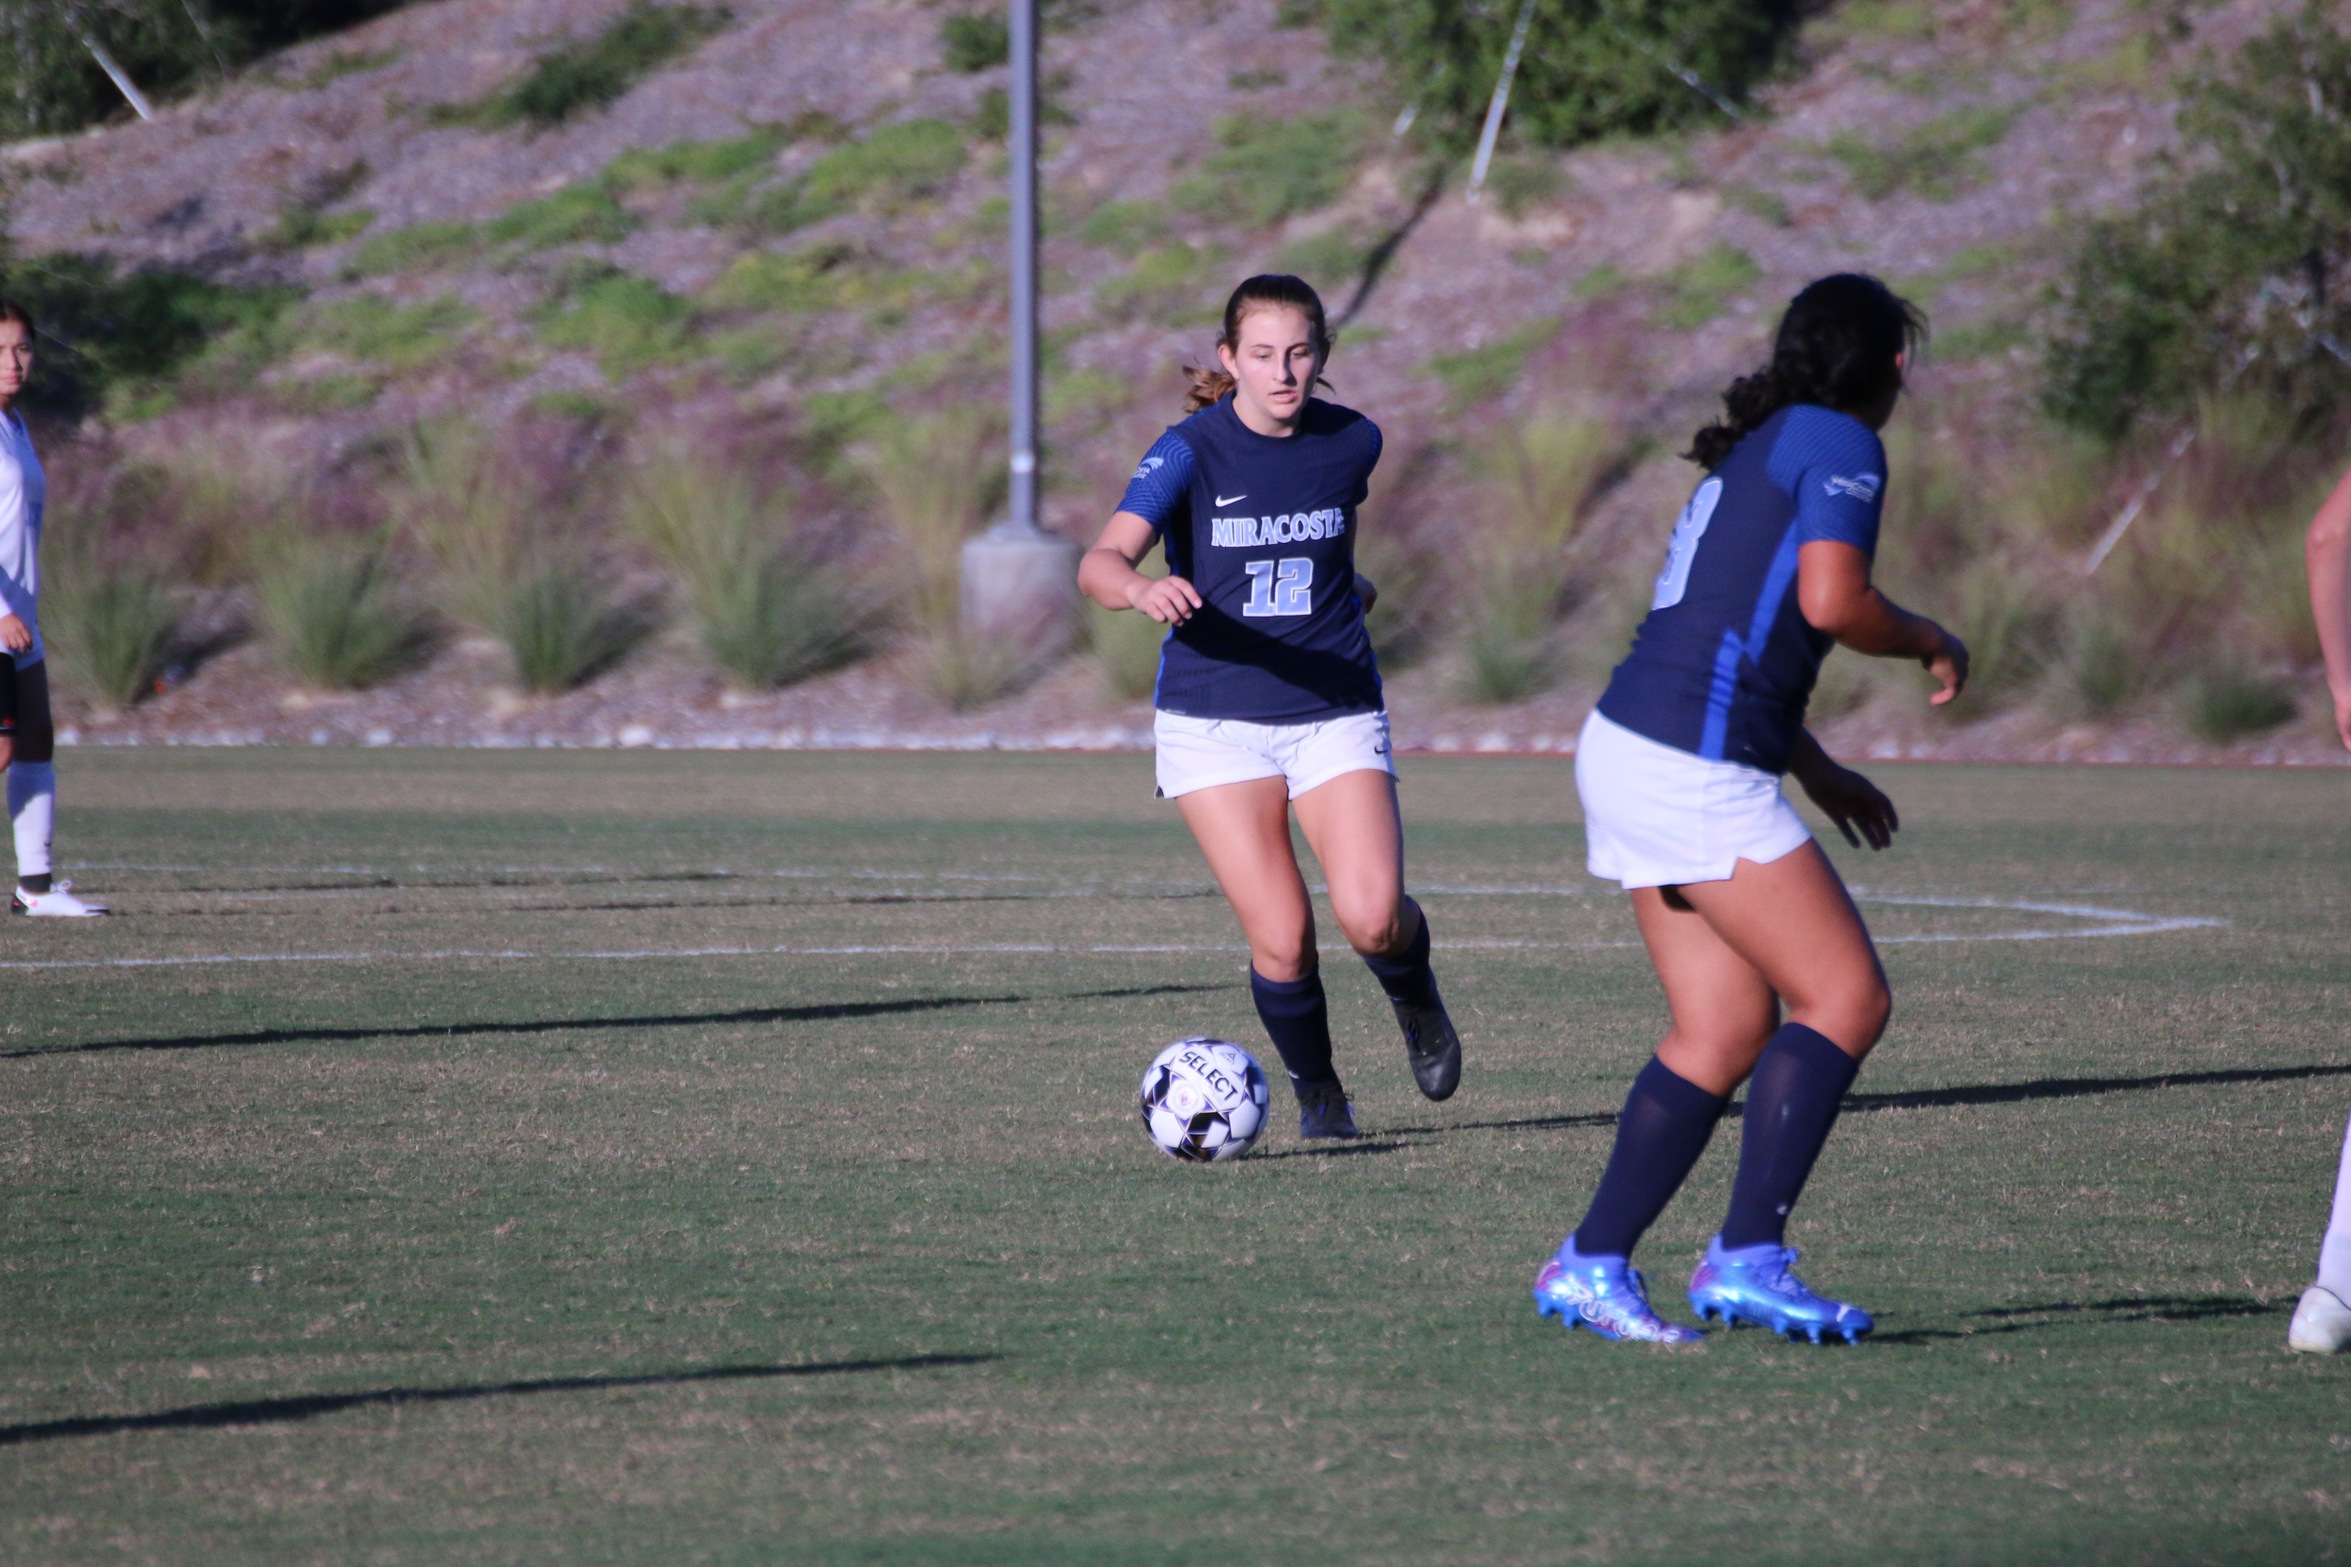 Katy King dribbles the soccer ball during a game.